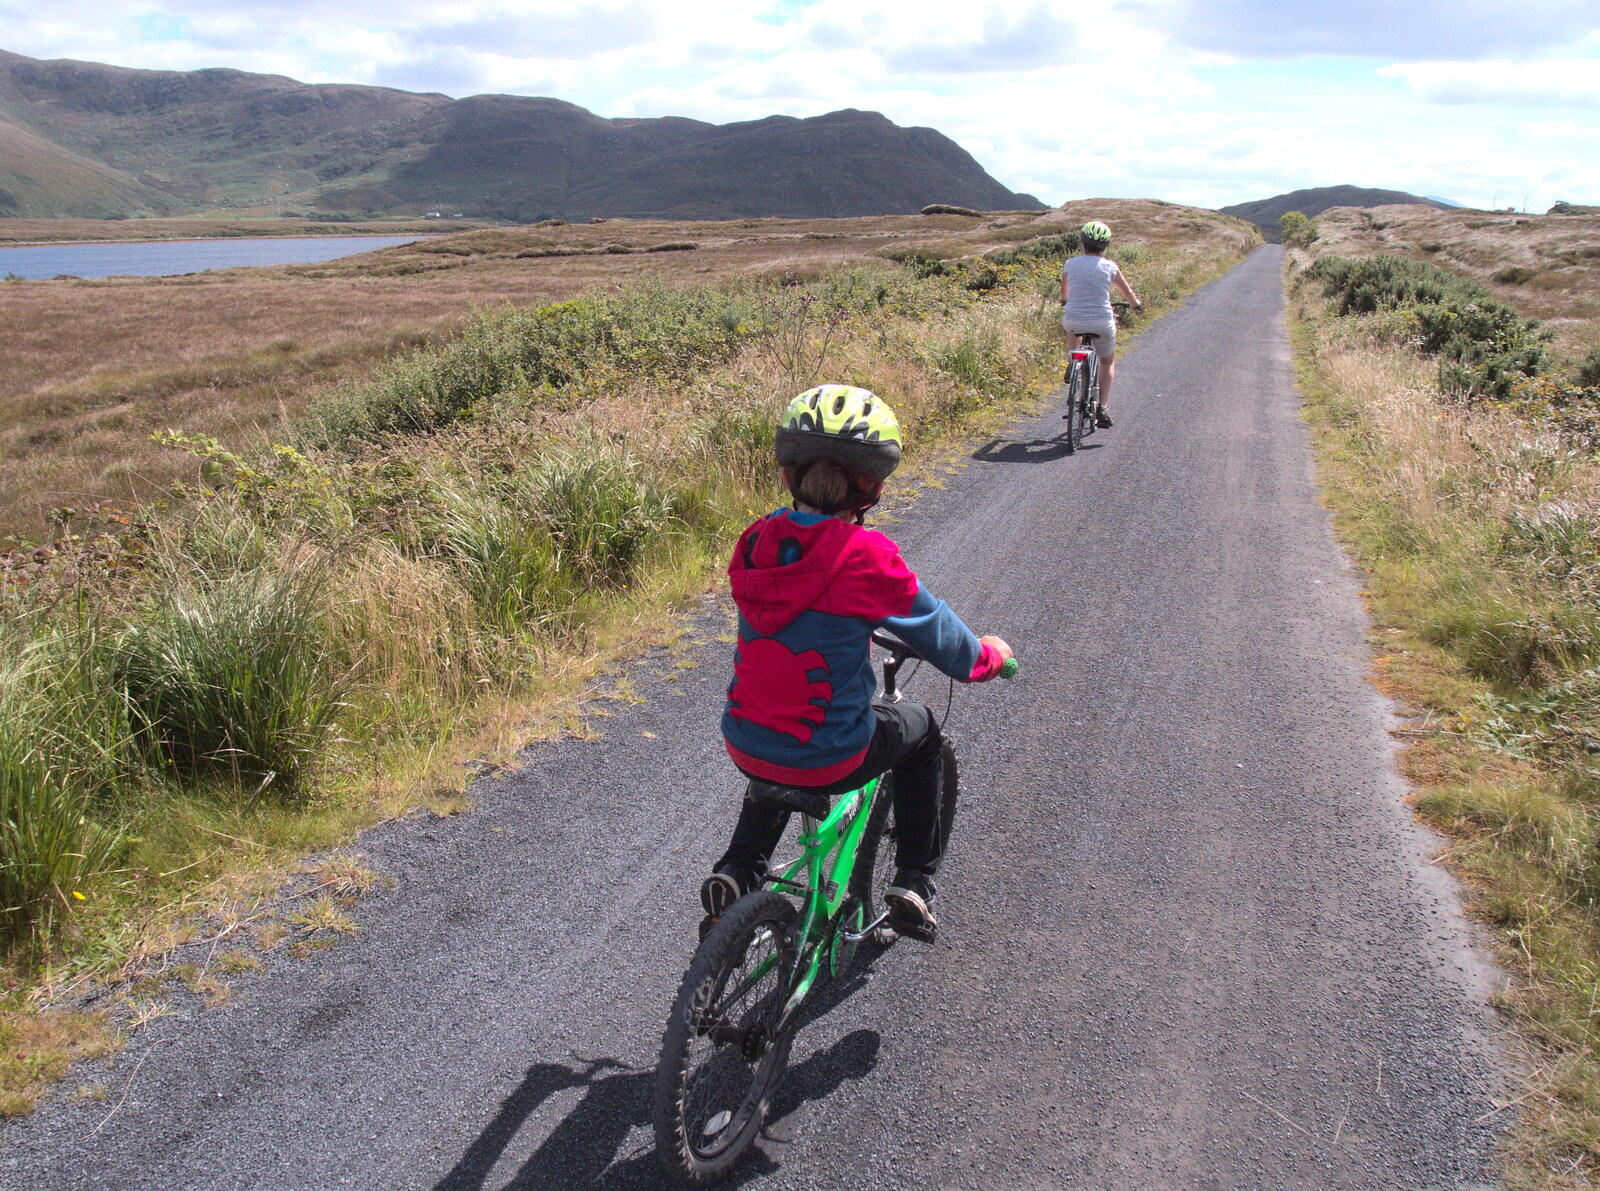 Fred and Isobel, back on the bike track from A Bike Ride to Mulranny, County Mayo, Ireland - 9th August 2017